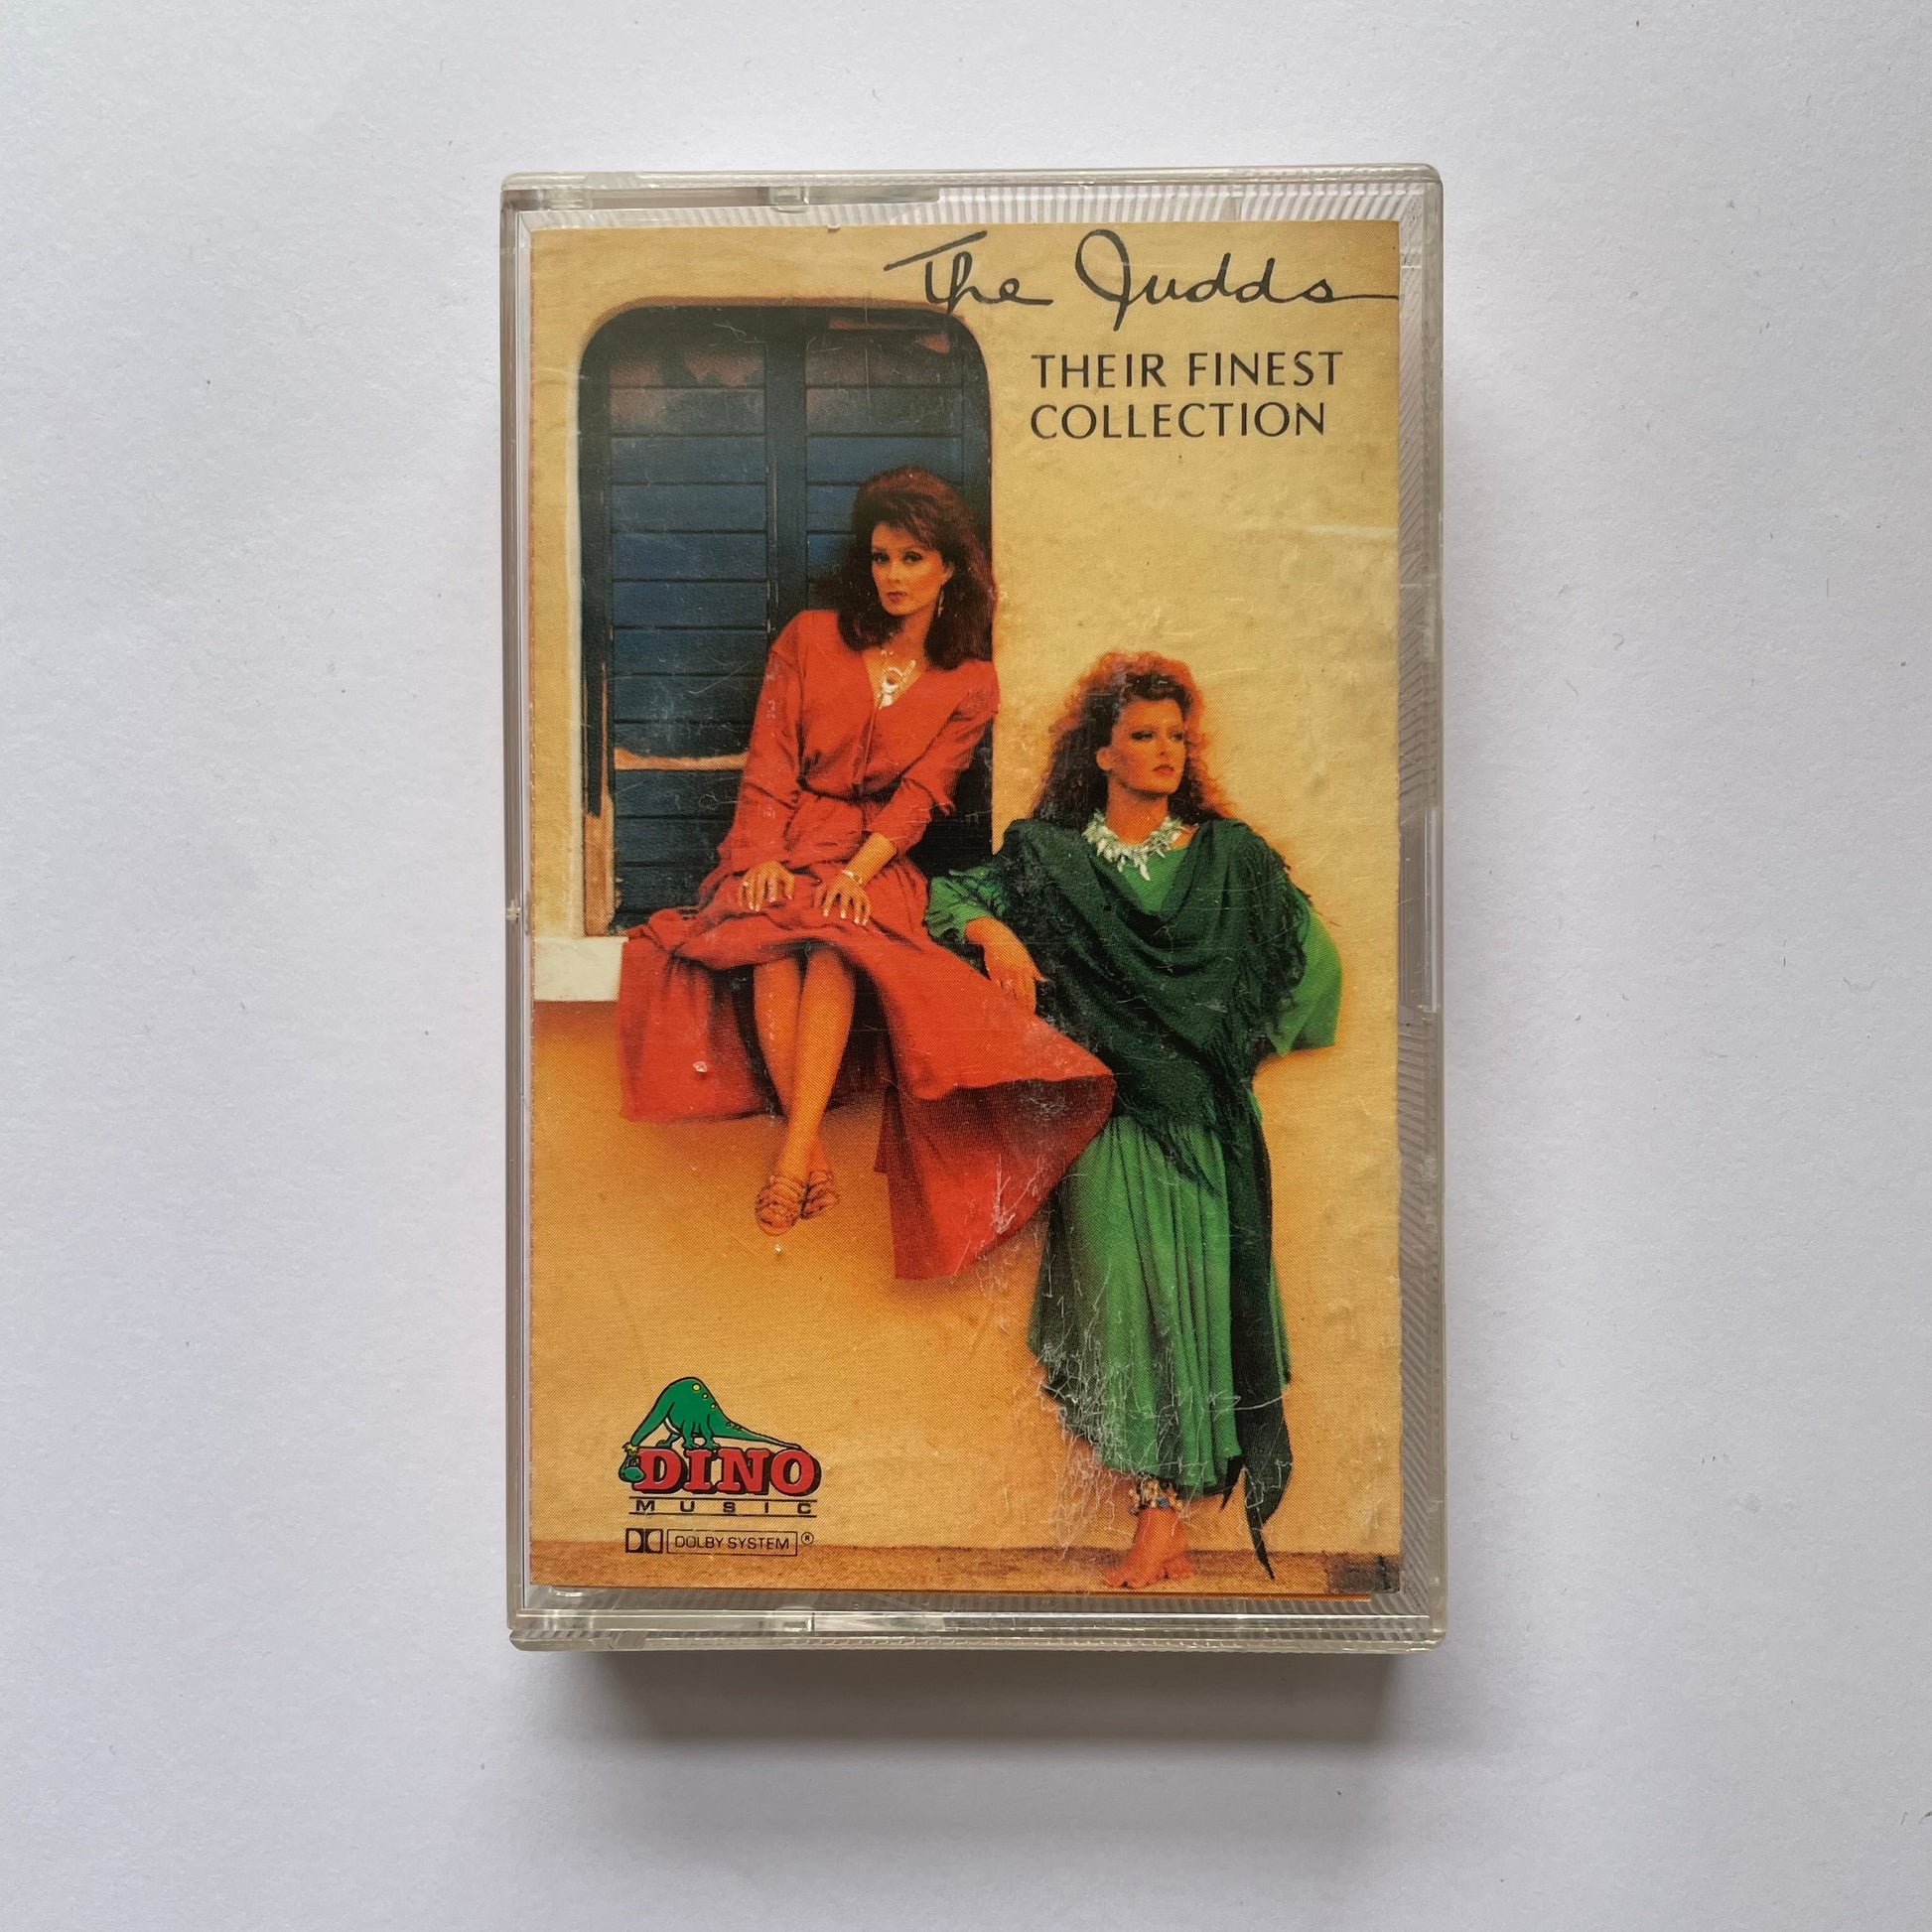 Tape Cassette The Judds Their Finest Collection front